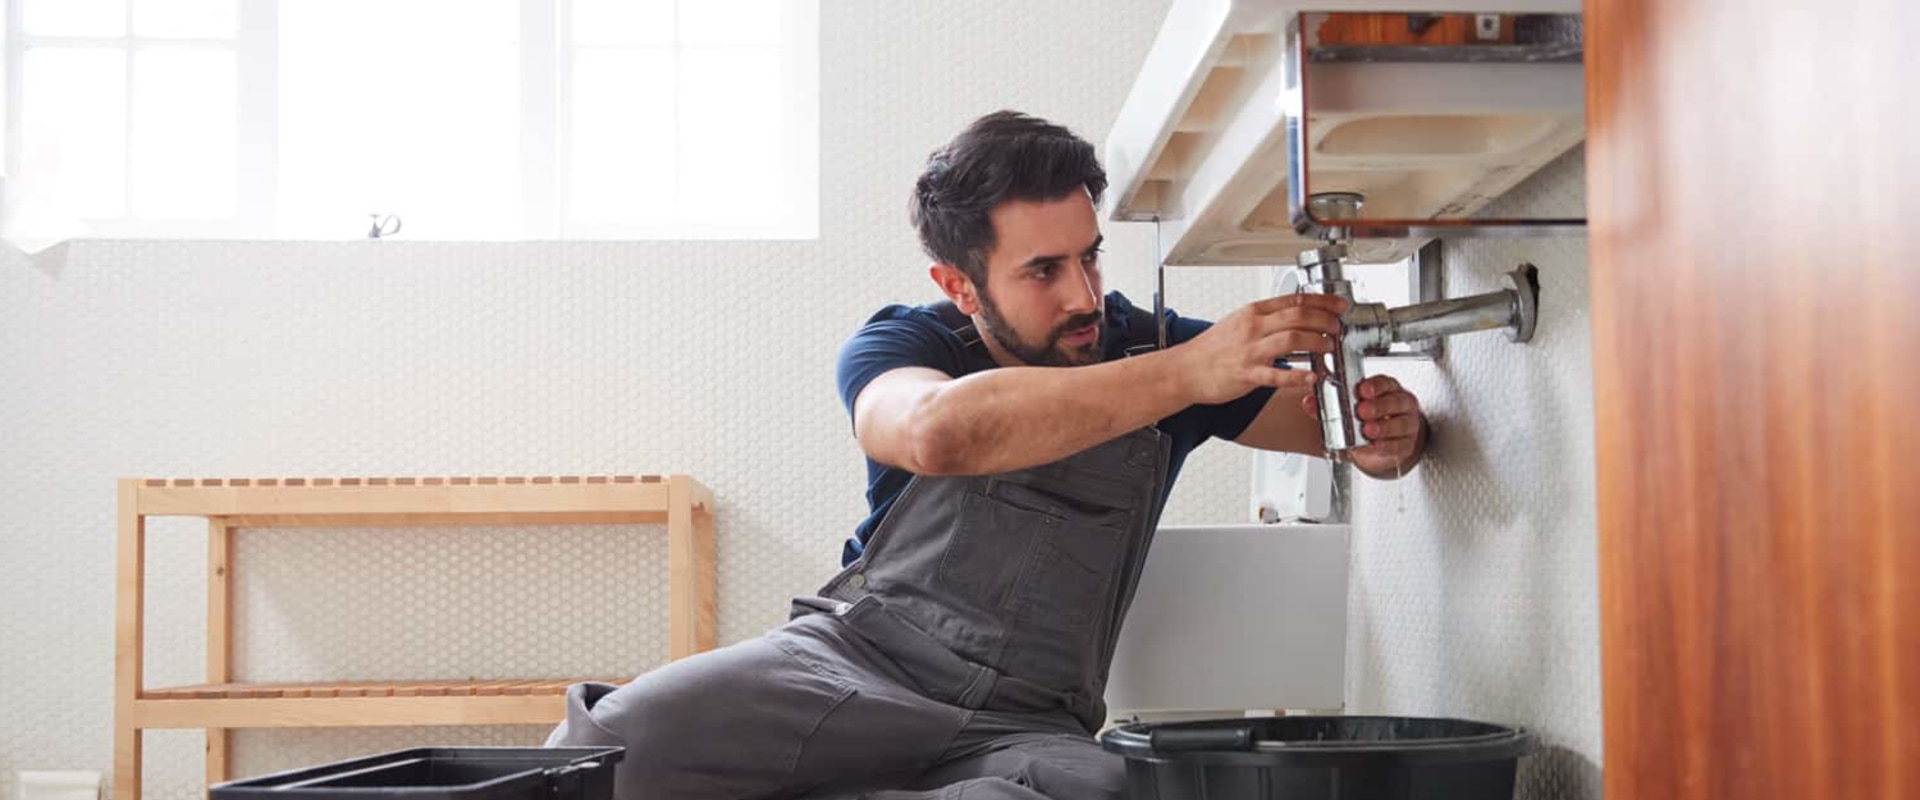 Find Affordable Plumbers in Your Area